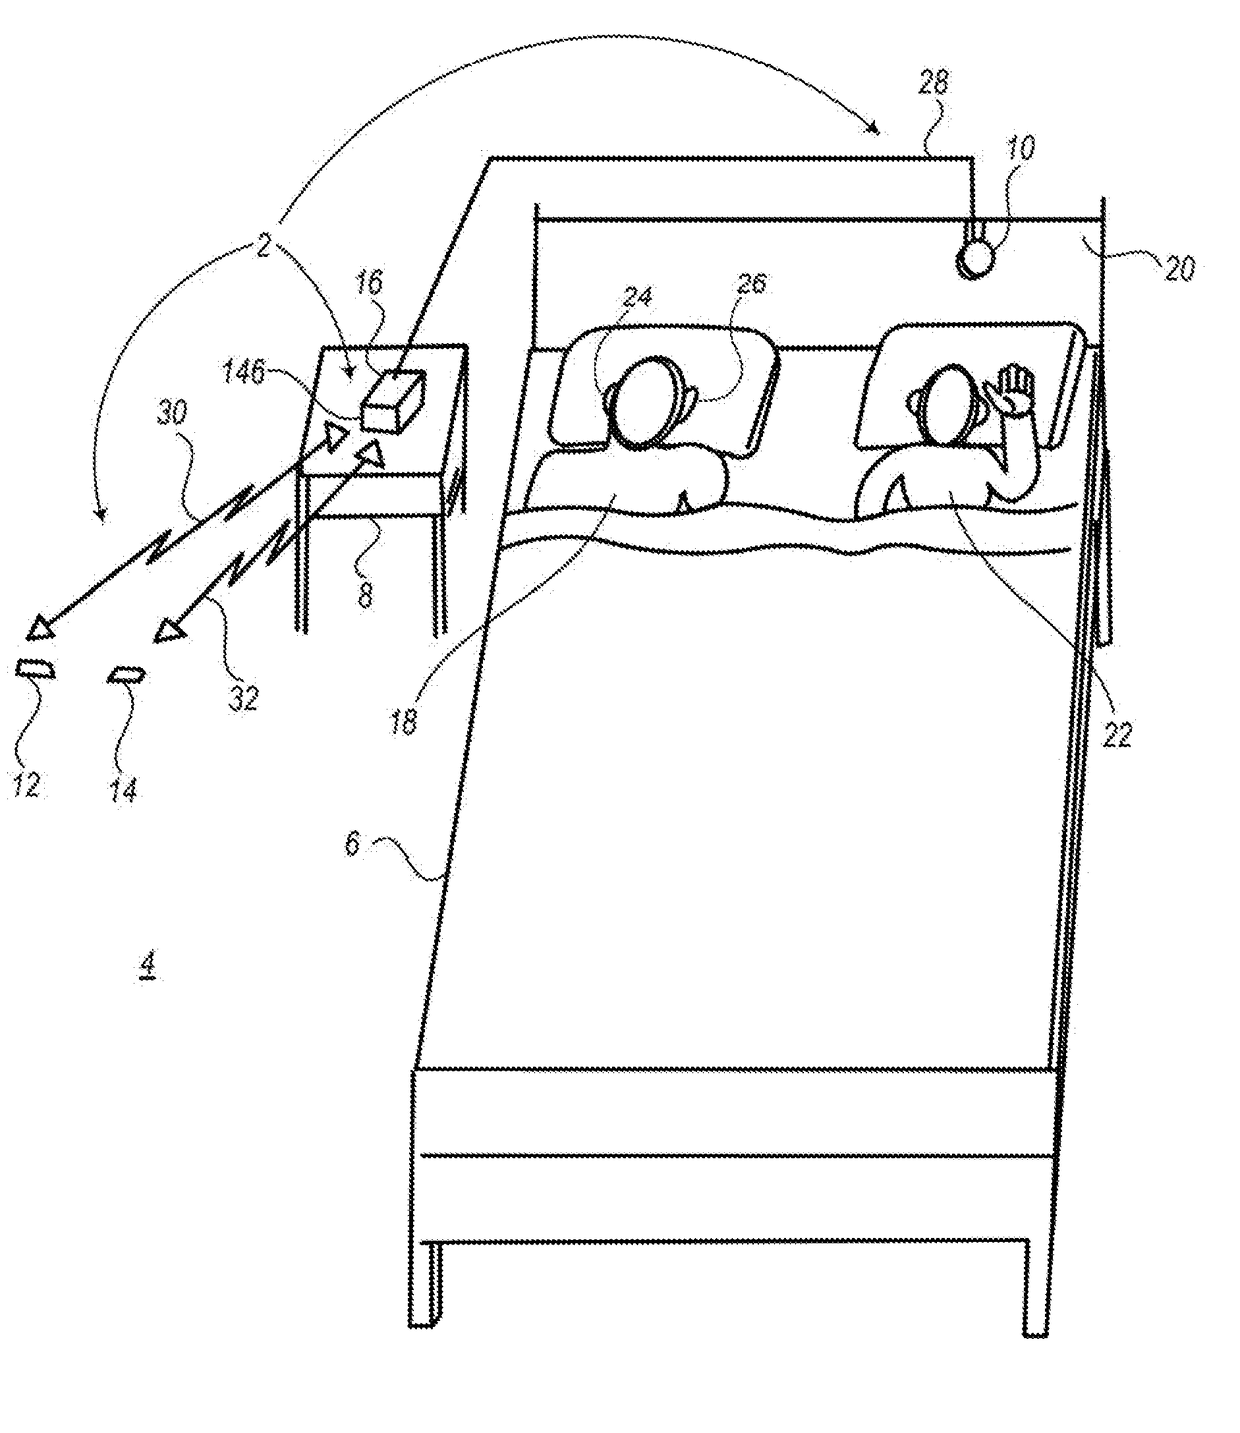 Snoring active noise-cancellation, masking, and suppression